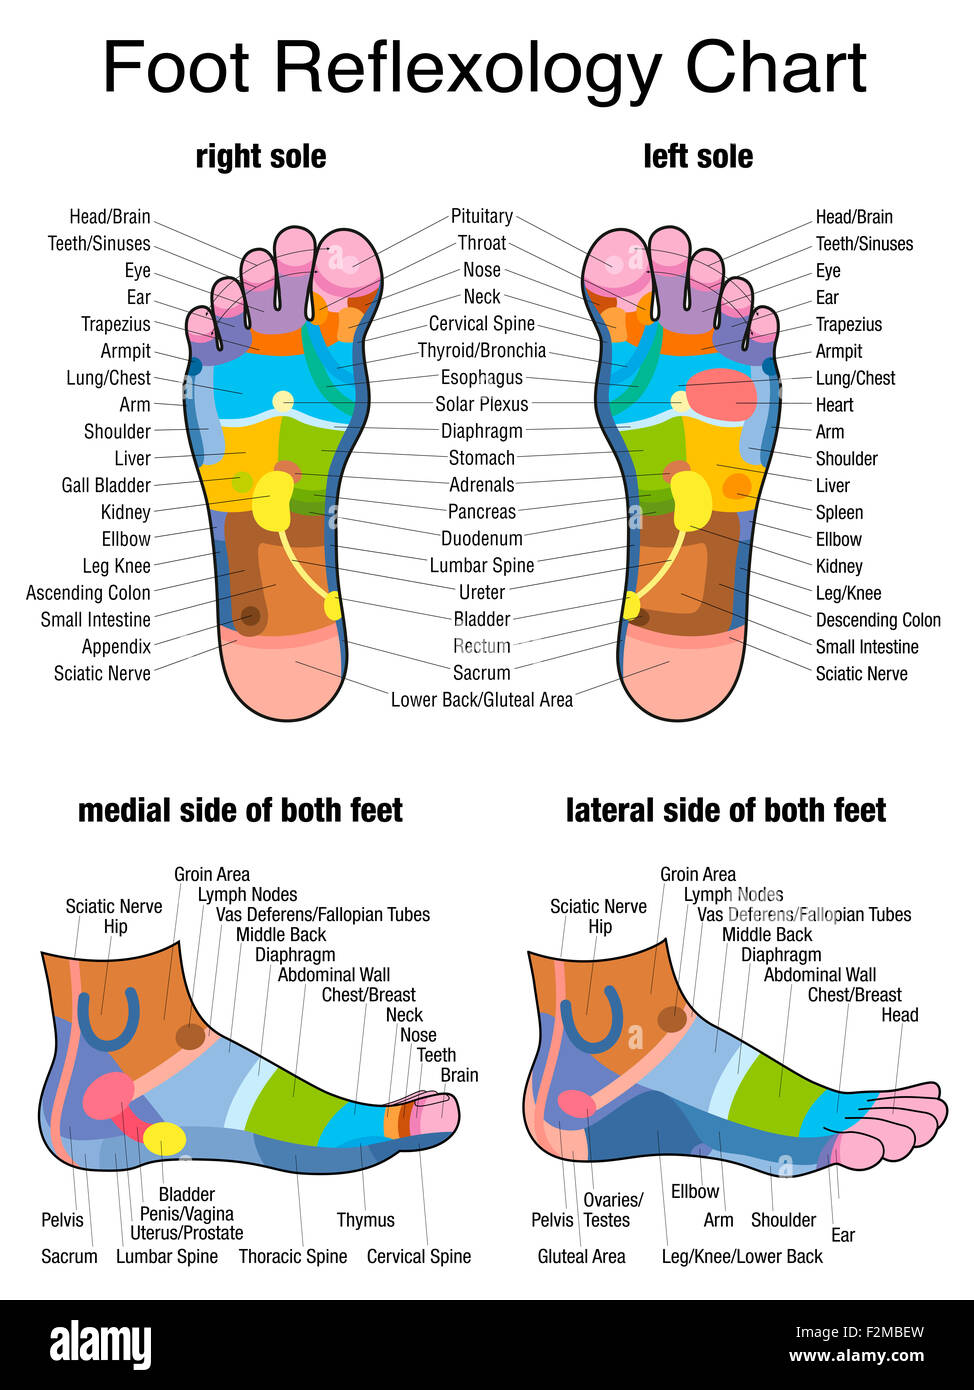 Reflex zones of the feet - soles and side views - accurate description of the corresponding internal organs and body parts. Stock Photo